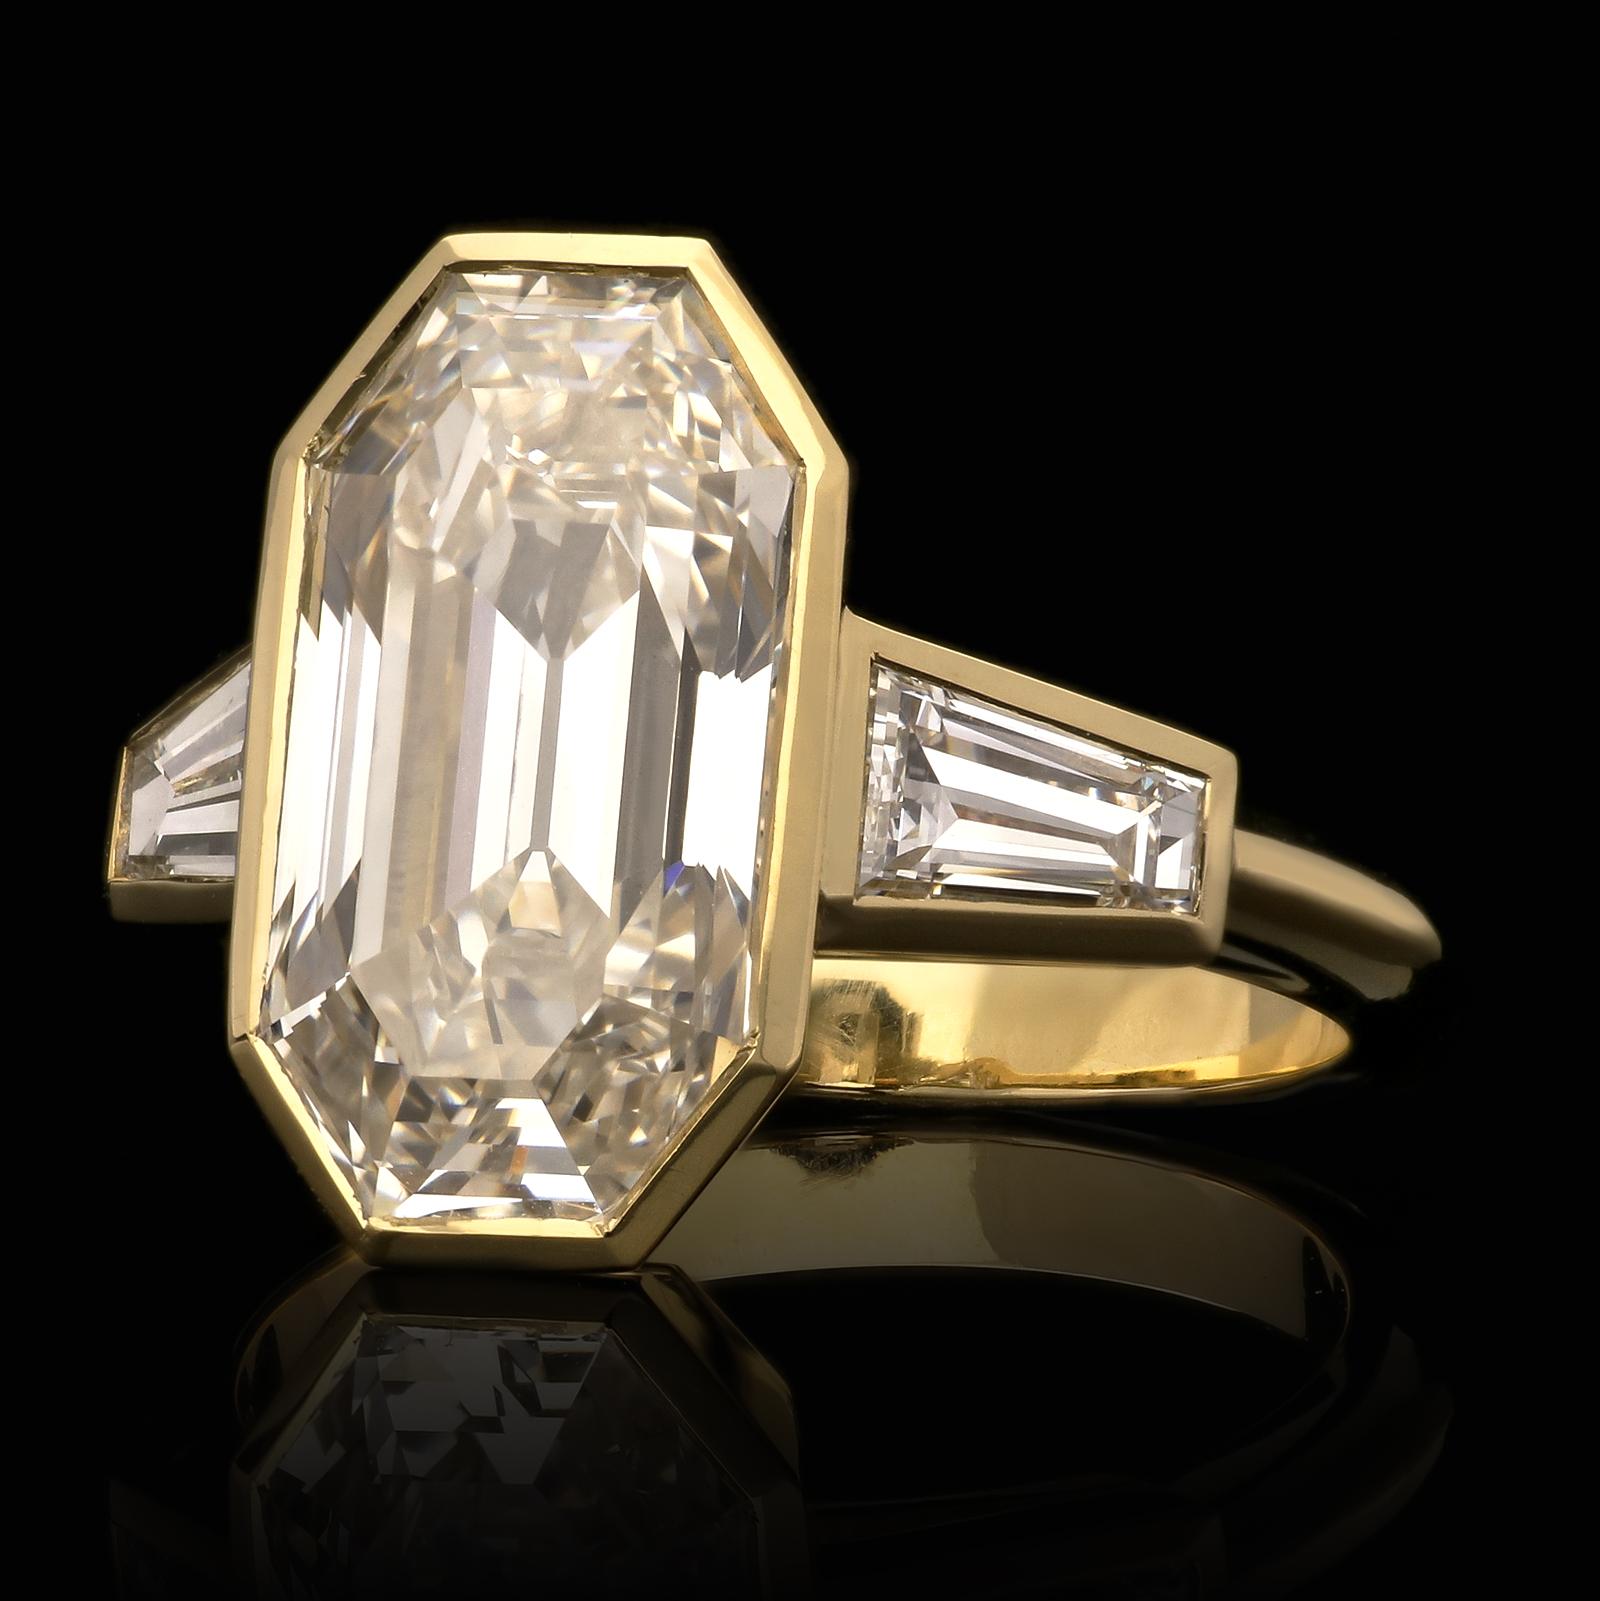 A beautiful emerald cut diamond bezel set ring by Hancocks centred with an old emerald cut diamond weighing 5.38ct and of I colour and VVS1 clarity in a fine bezel setting of 18ct yellow gold set between shoulders of tapered baguette diamonds